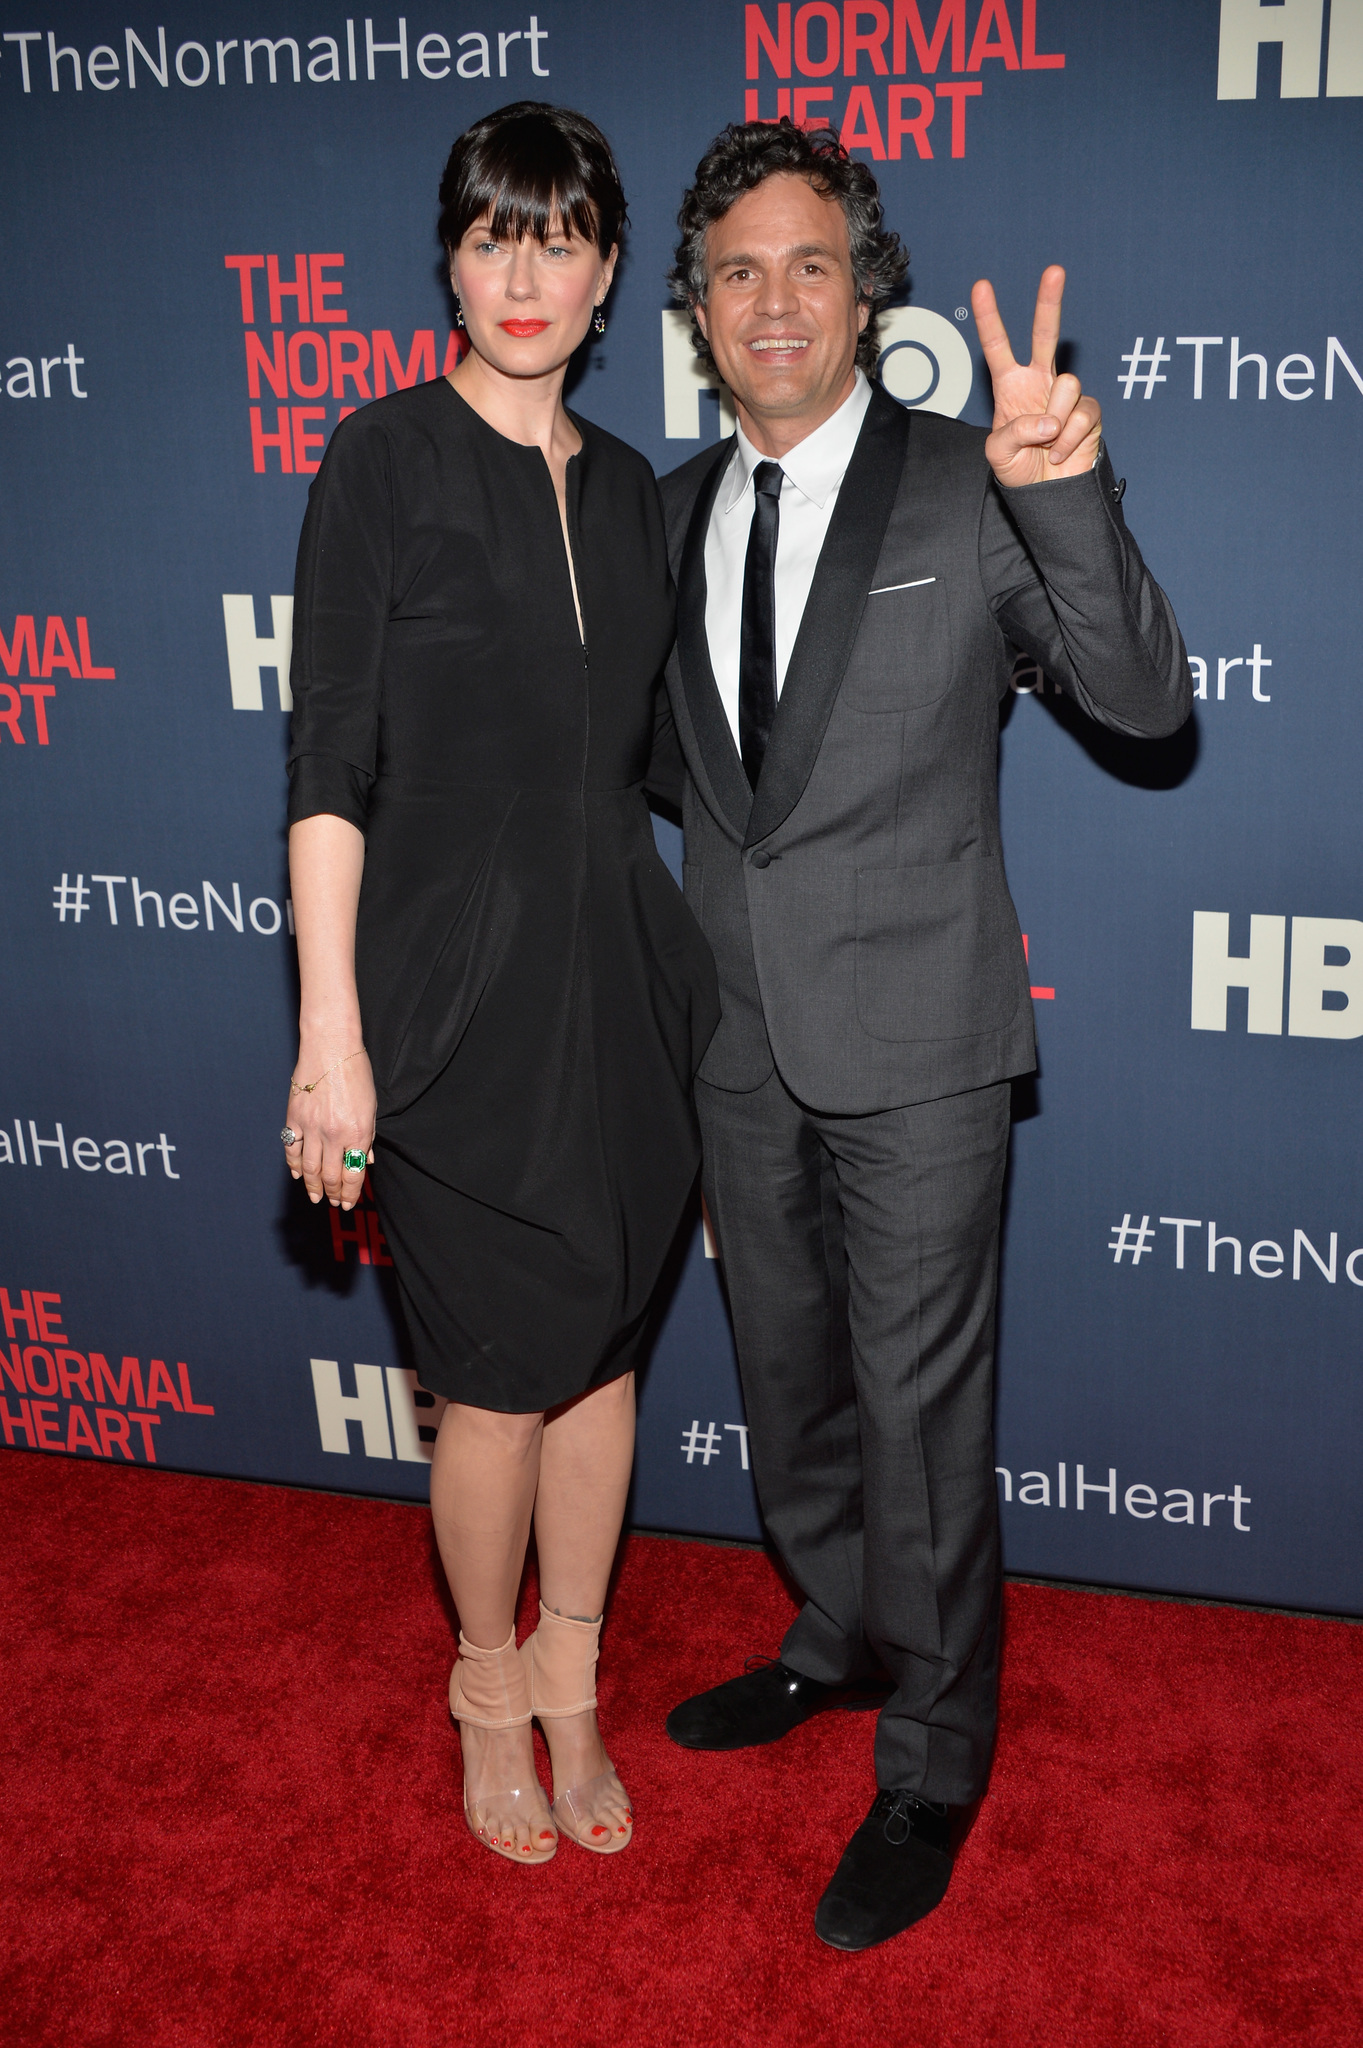 Sunrise Coigney and Mark Ruffalo at event of The Normal Heart (2014)